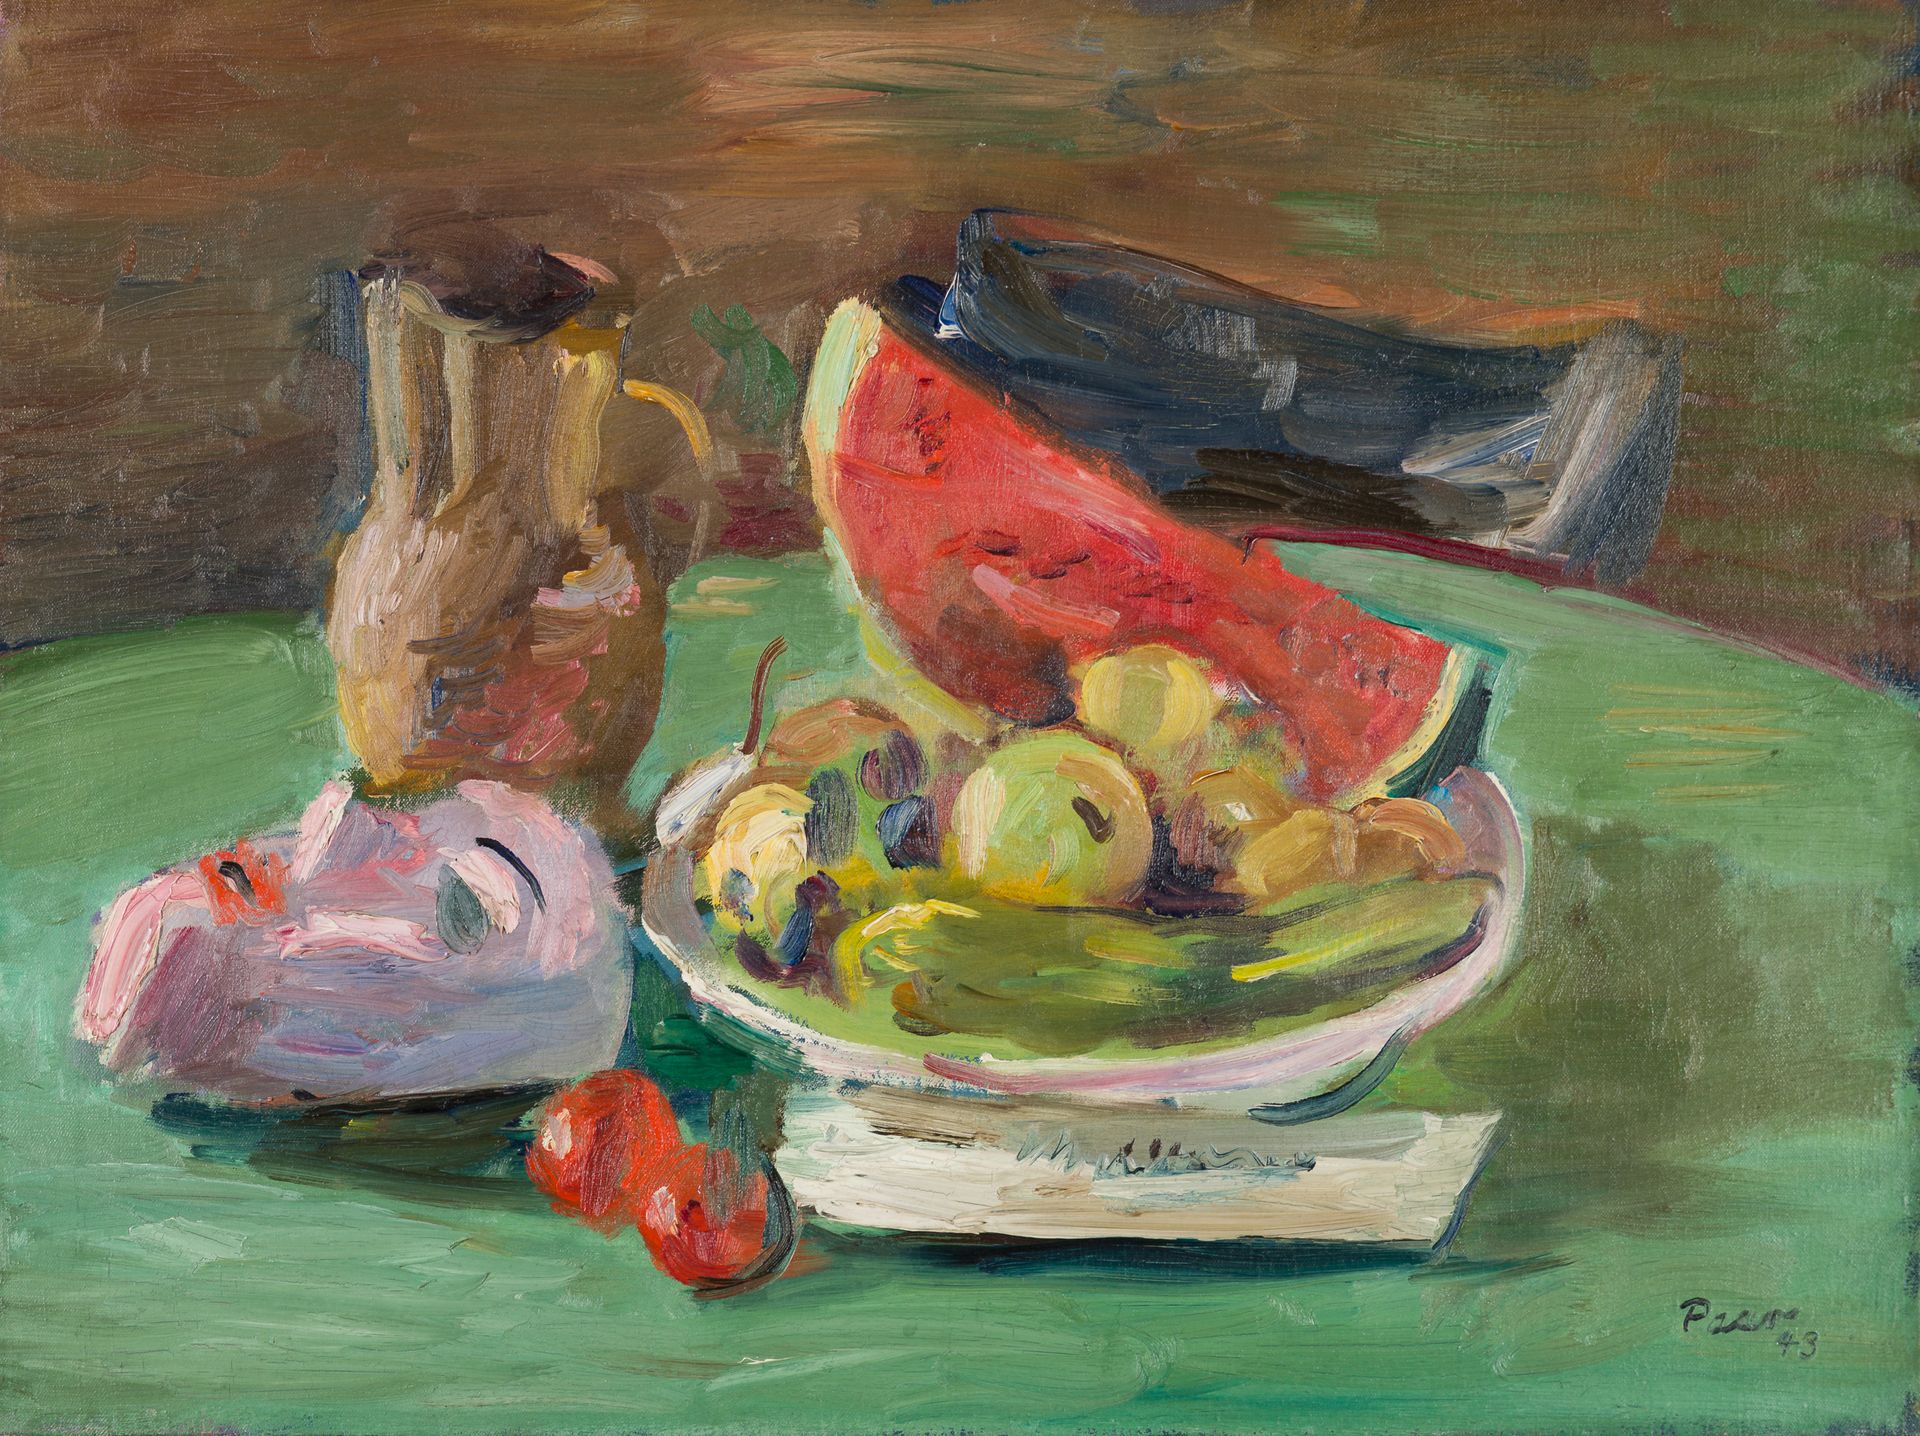 Paar, Ernst Still life, 1943
Oil on canvas
Signed and dated lower right
45,5 x 6&hellip;